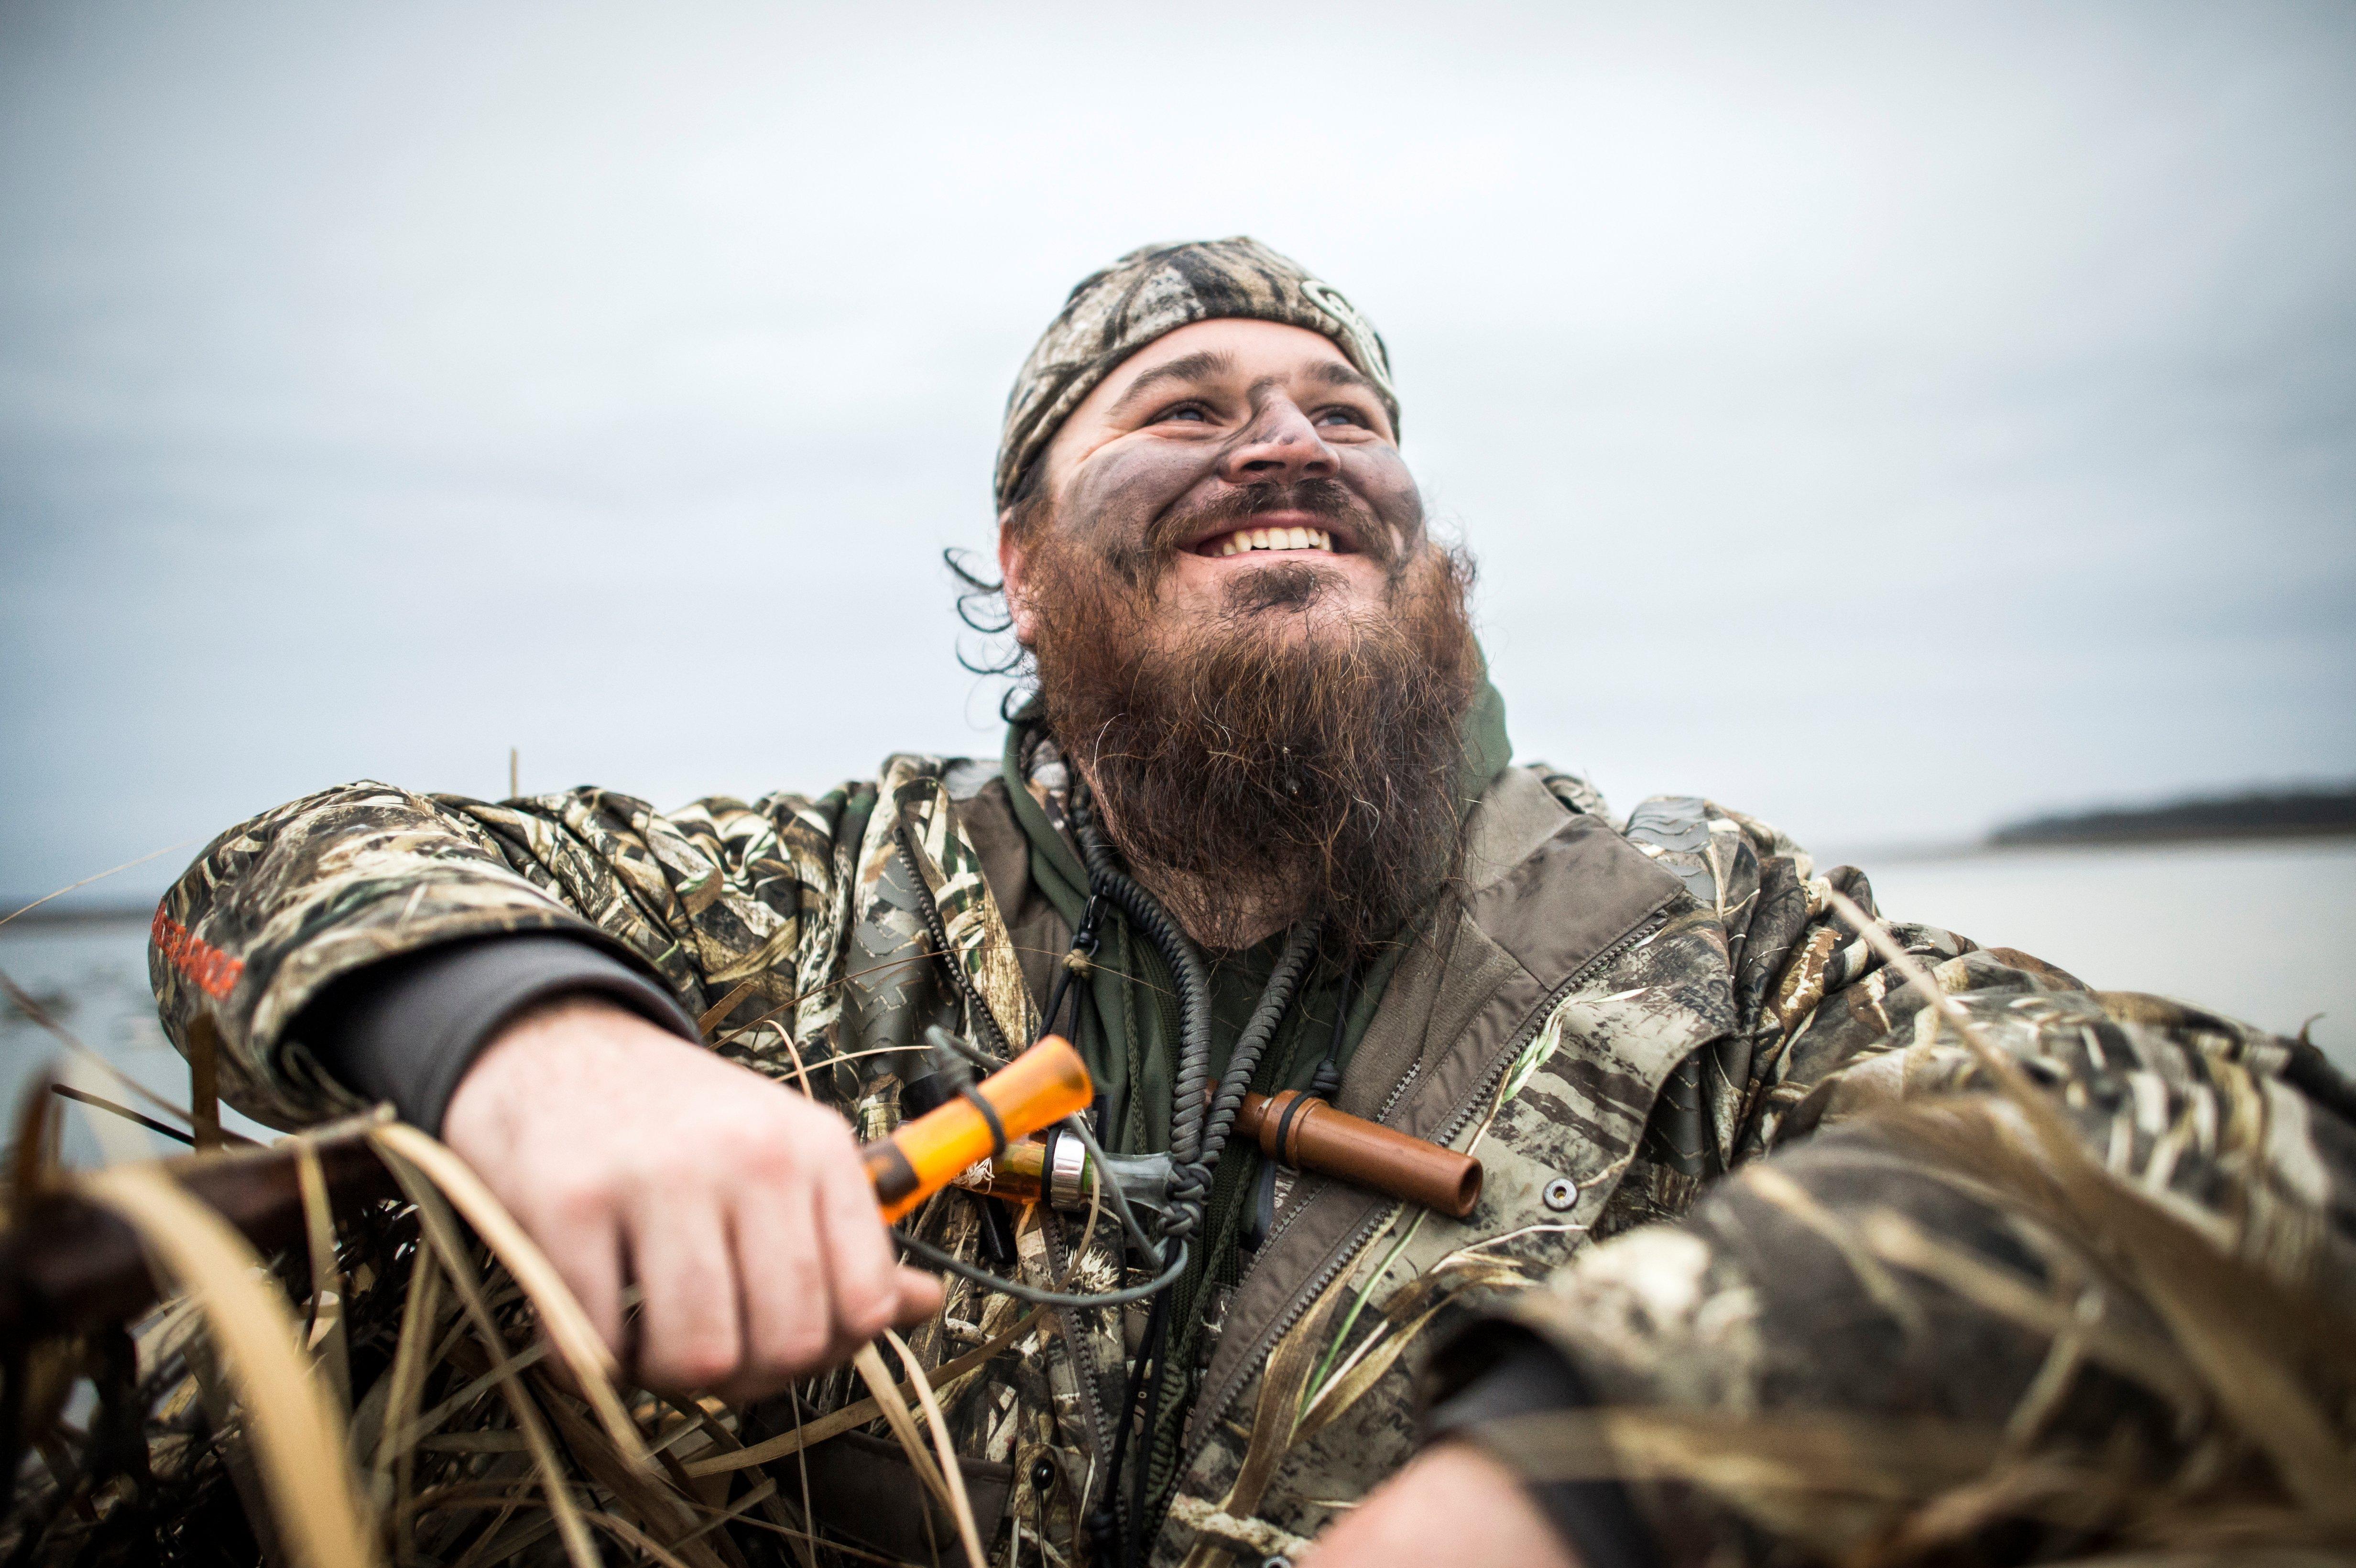 Want to be a good duck caller? Justin Martin says you should listen to real ducks and practice a lot. Photo © Duck Commander